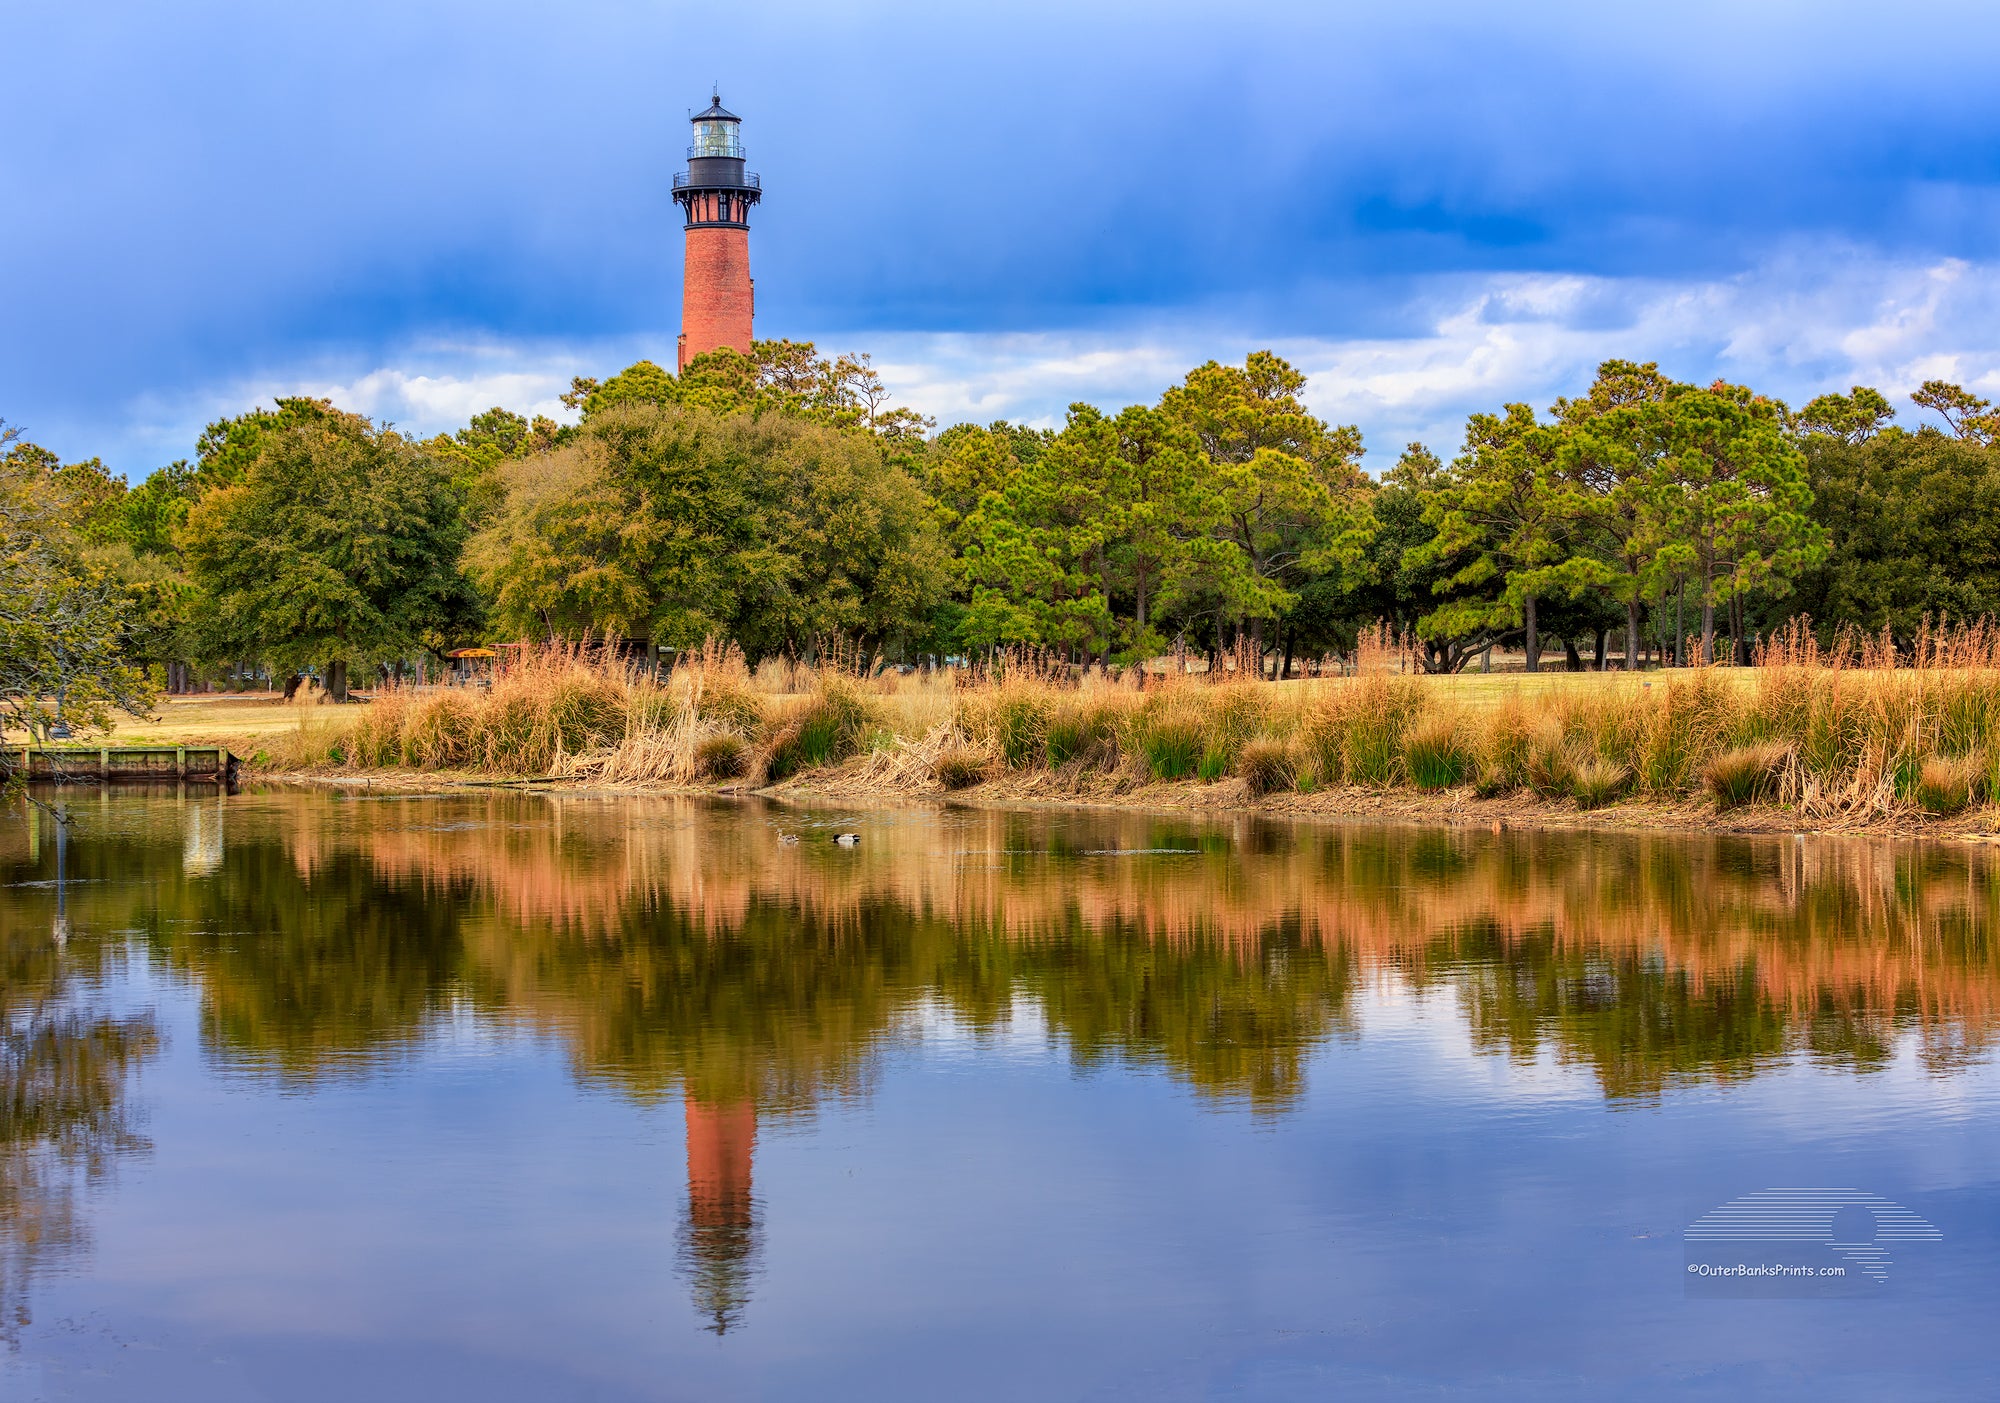 Reflection of the Currituck Beach Lighthouse  in Corolla on a late afternoon.